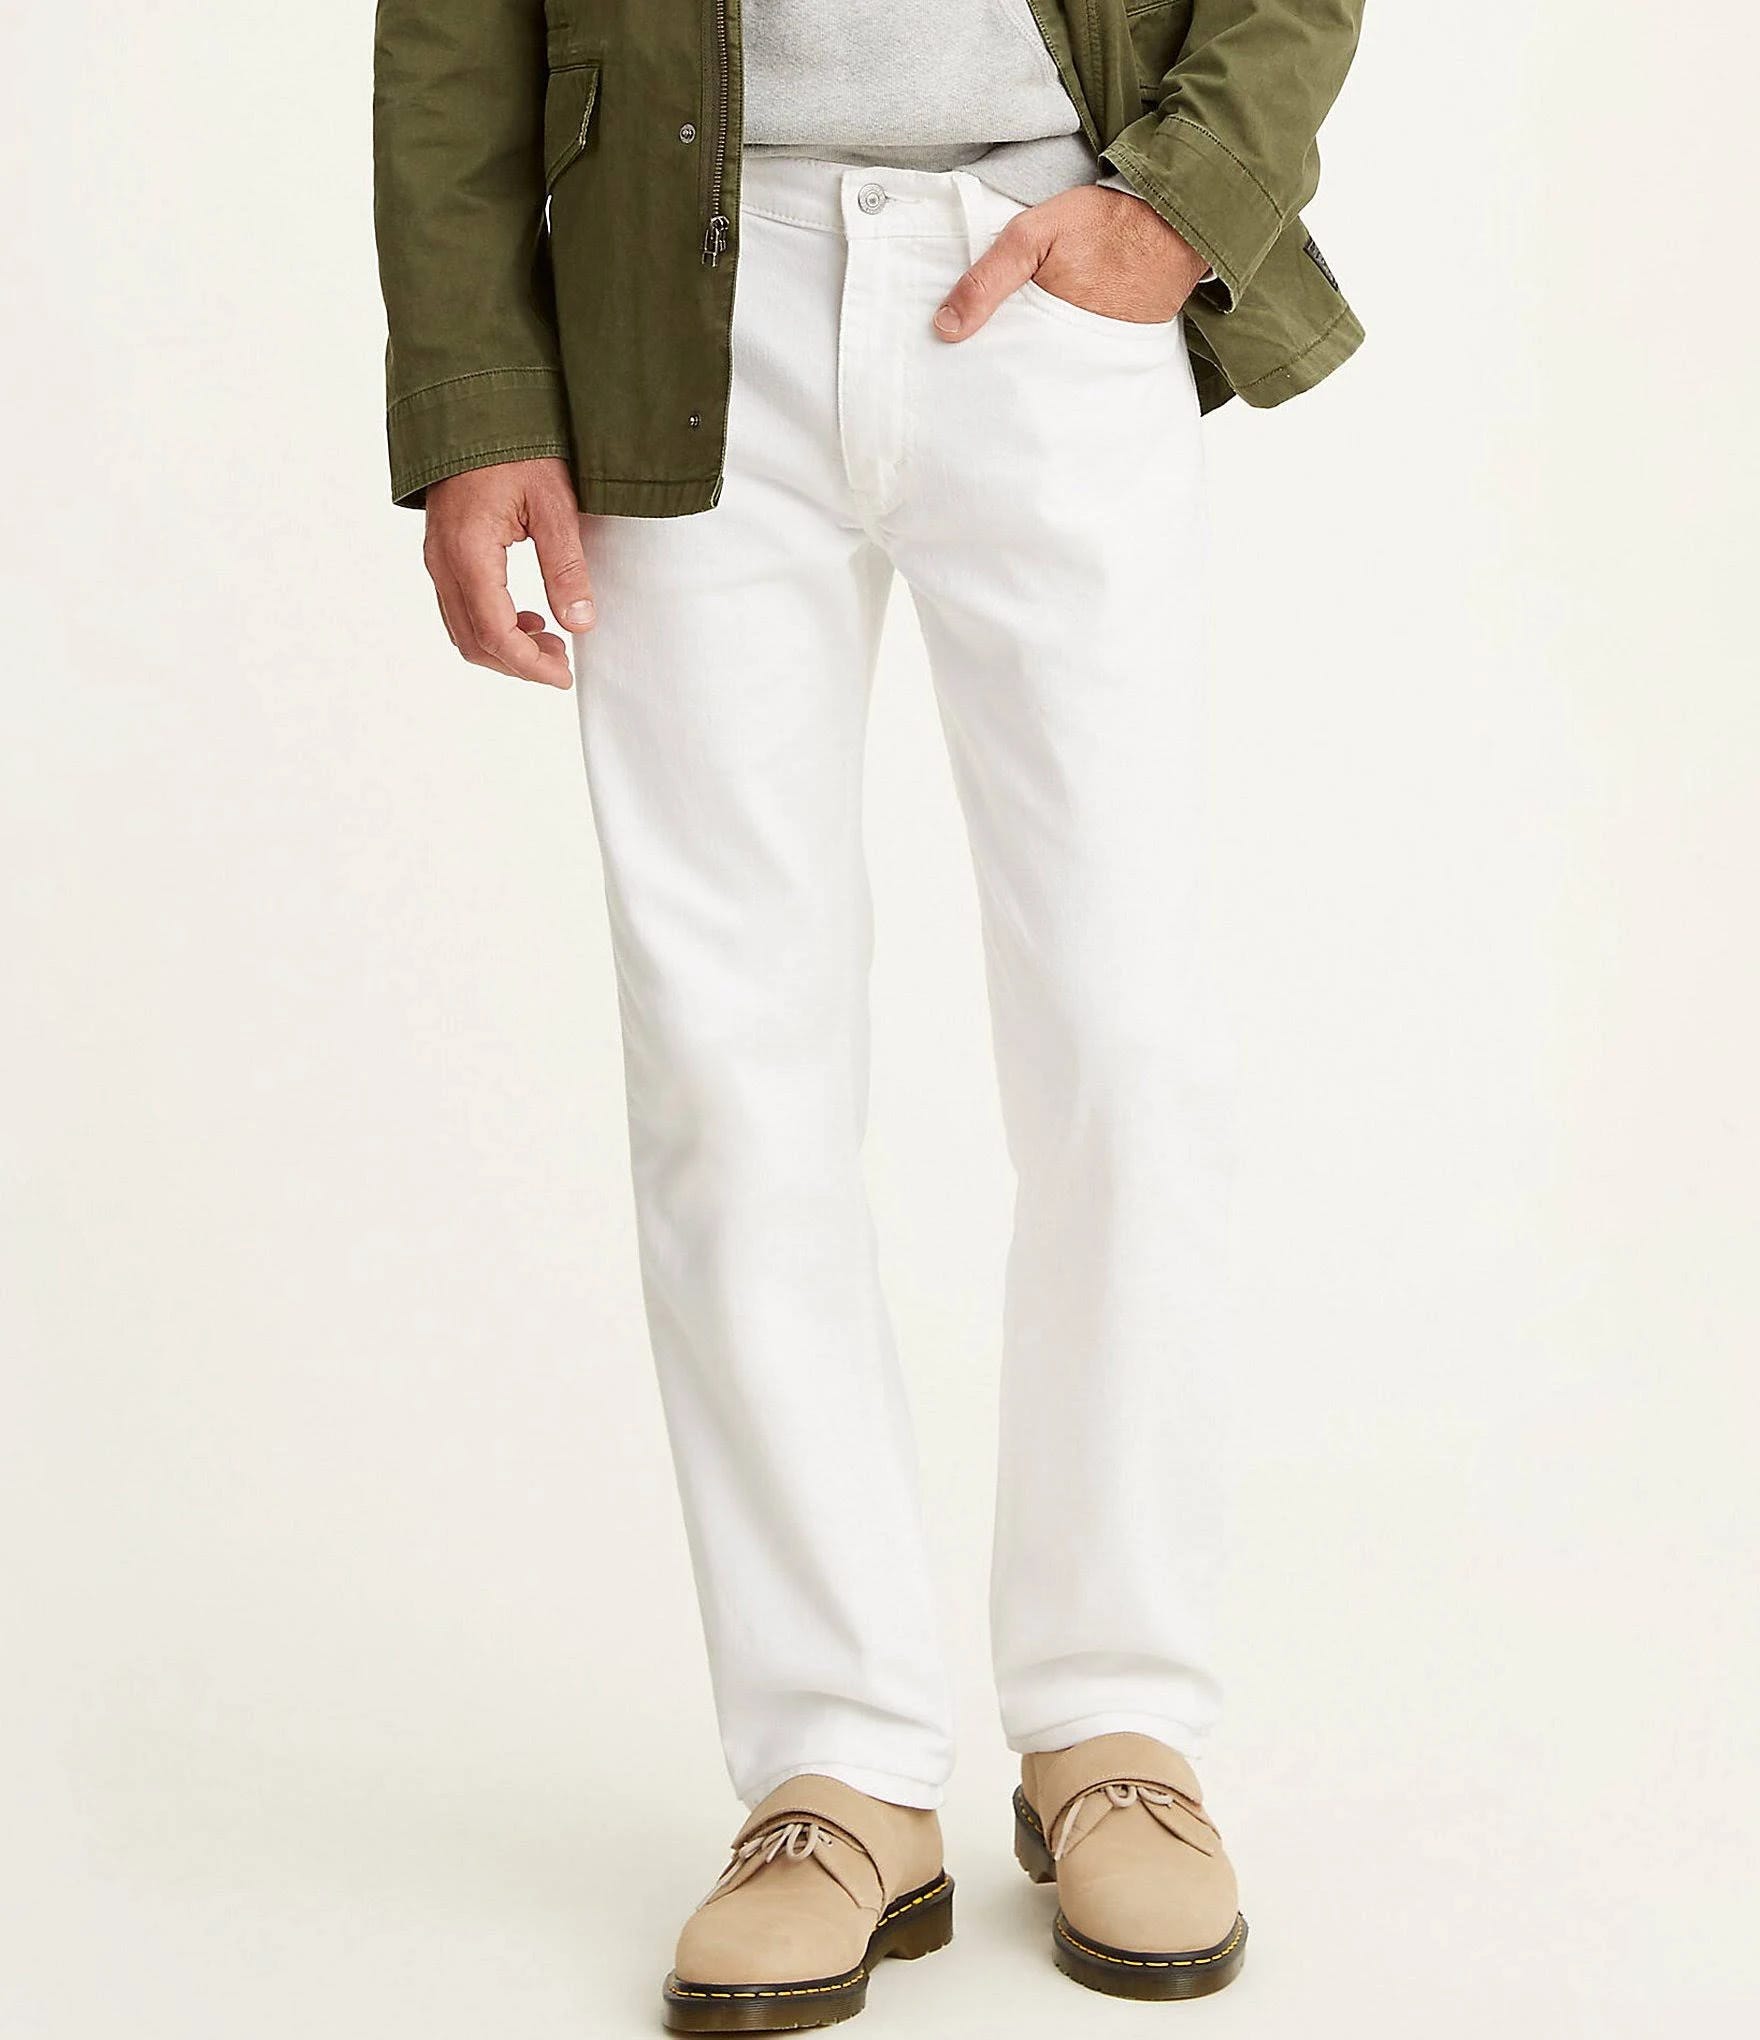 Stylish Levi's Straight Men's White Jeans with Stretch | Image